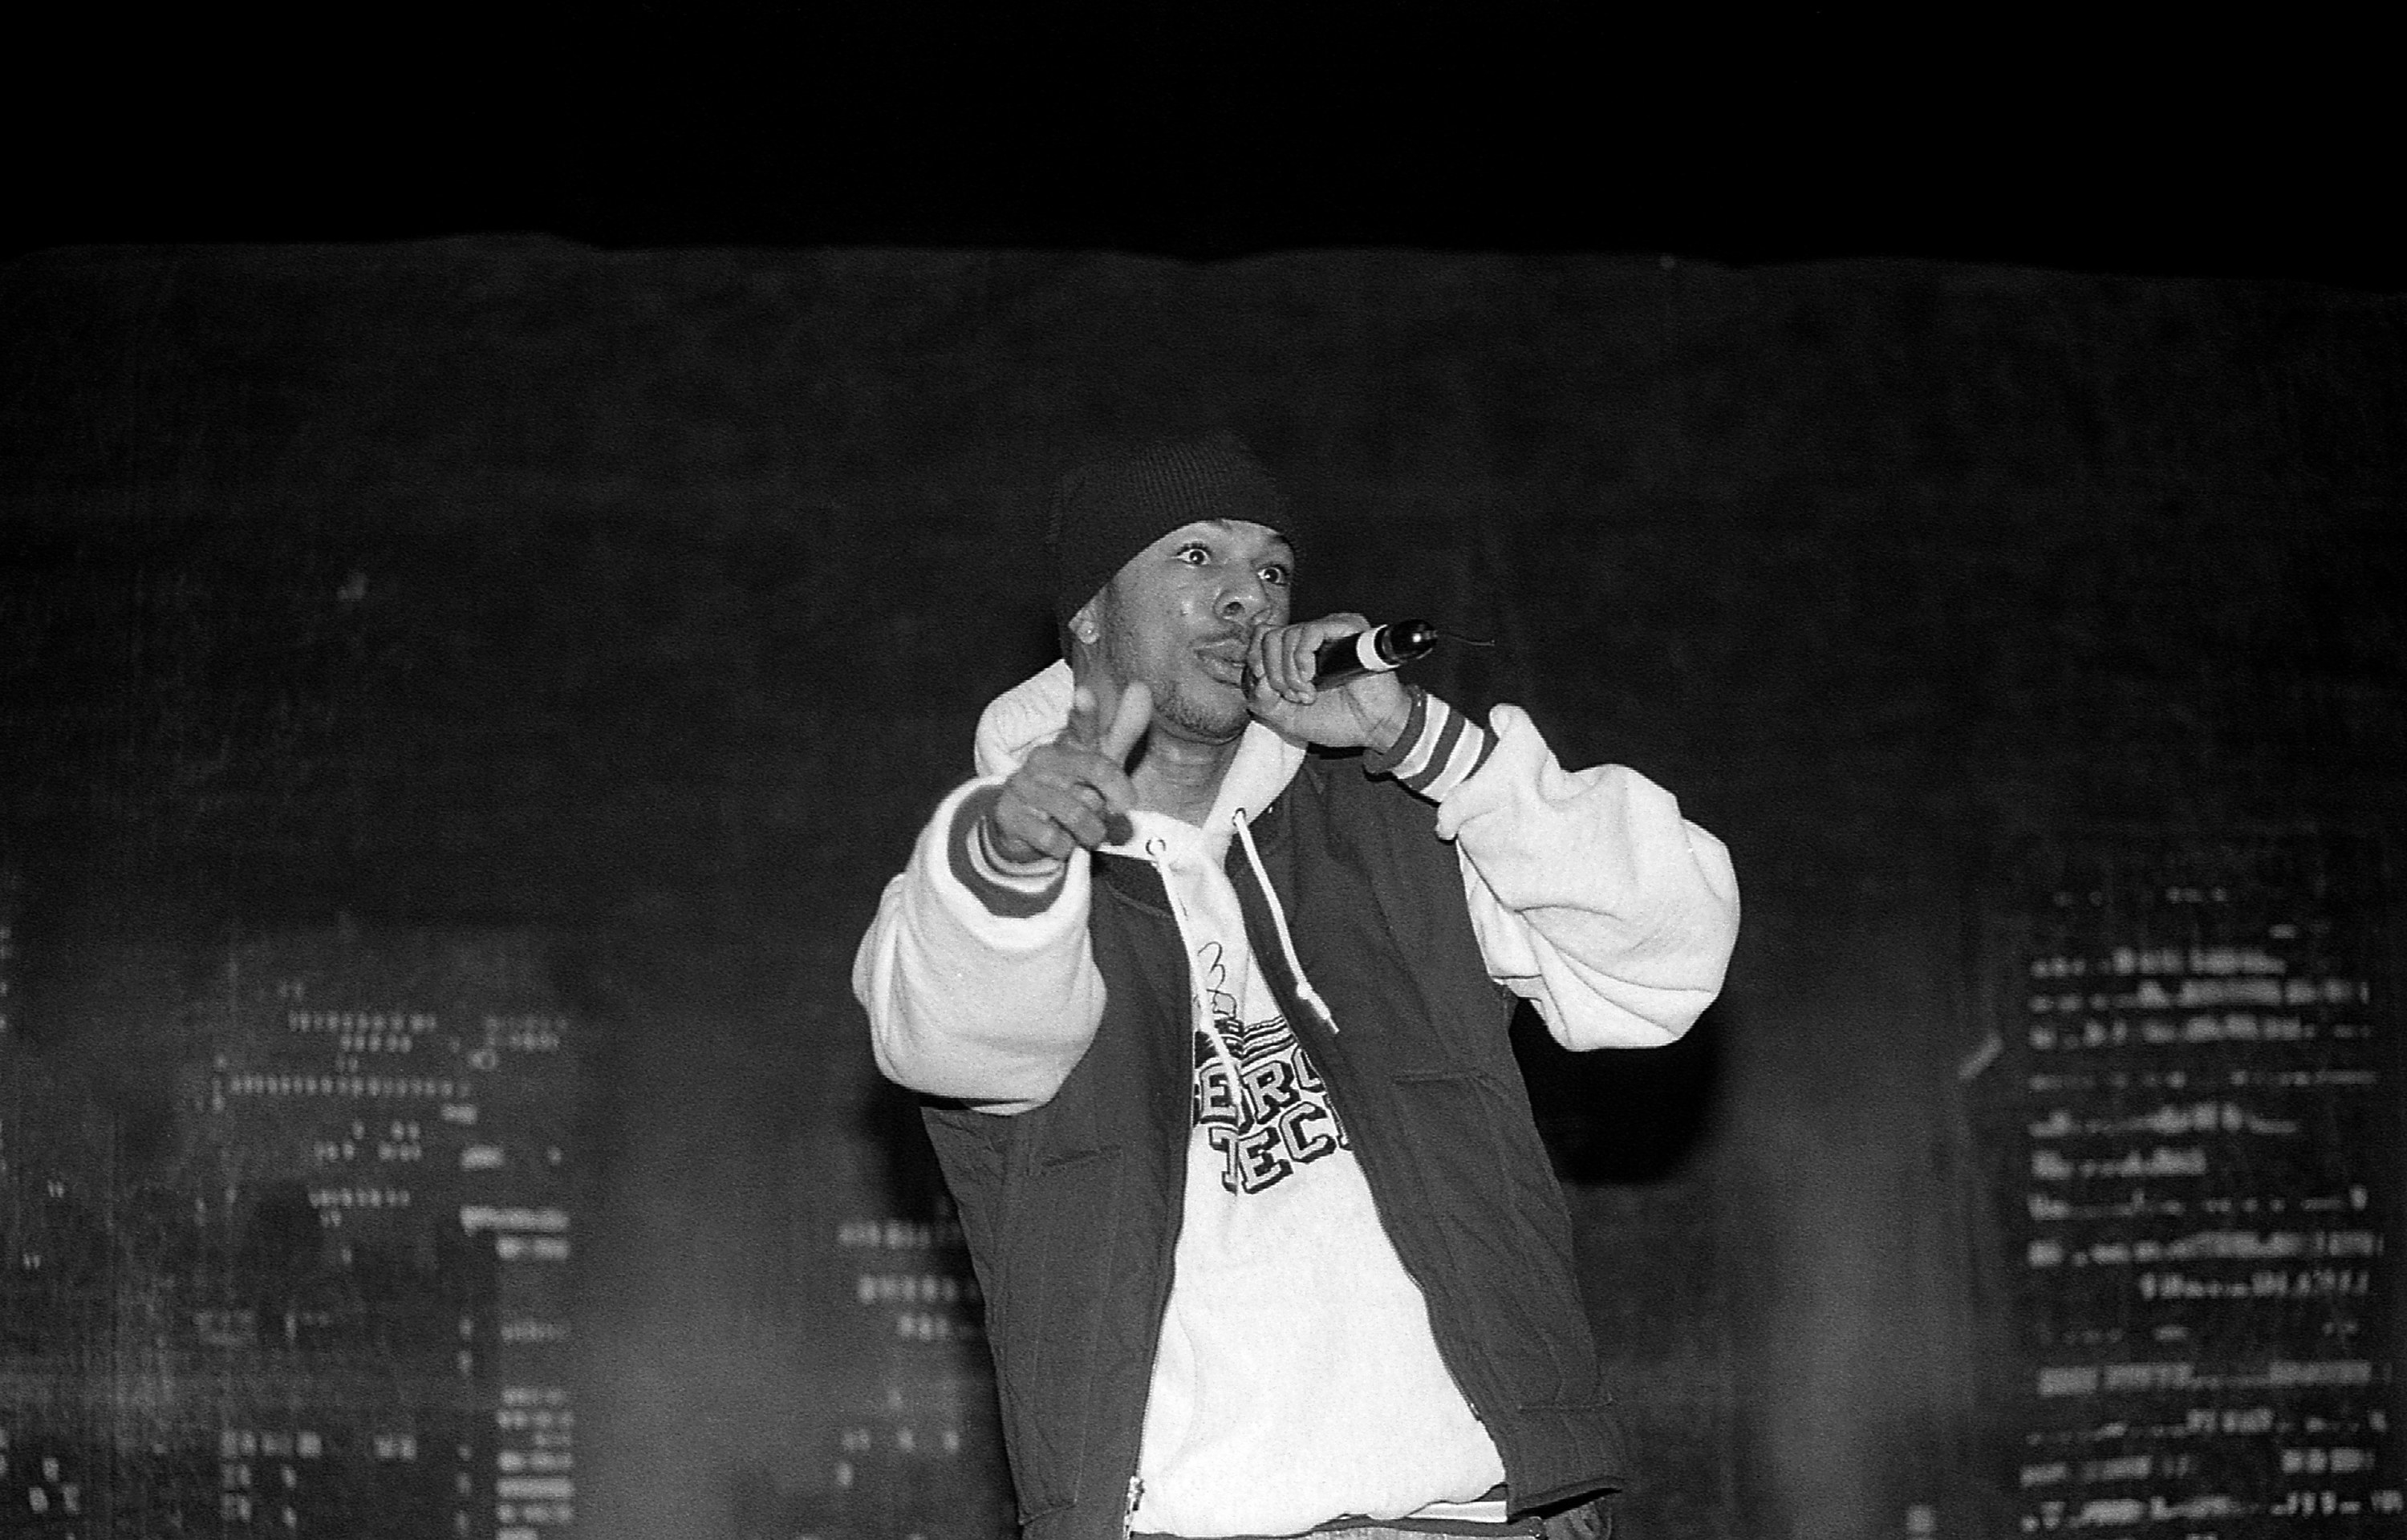 Common Sense performs in Chicago in 1992